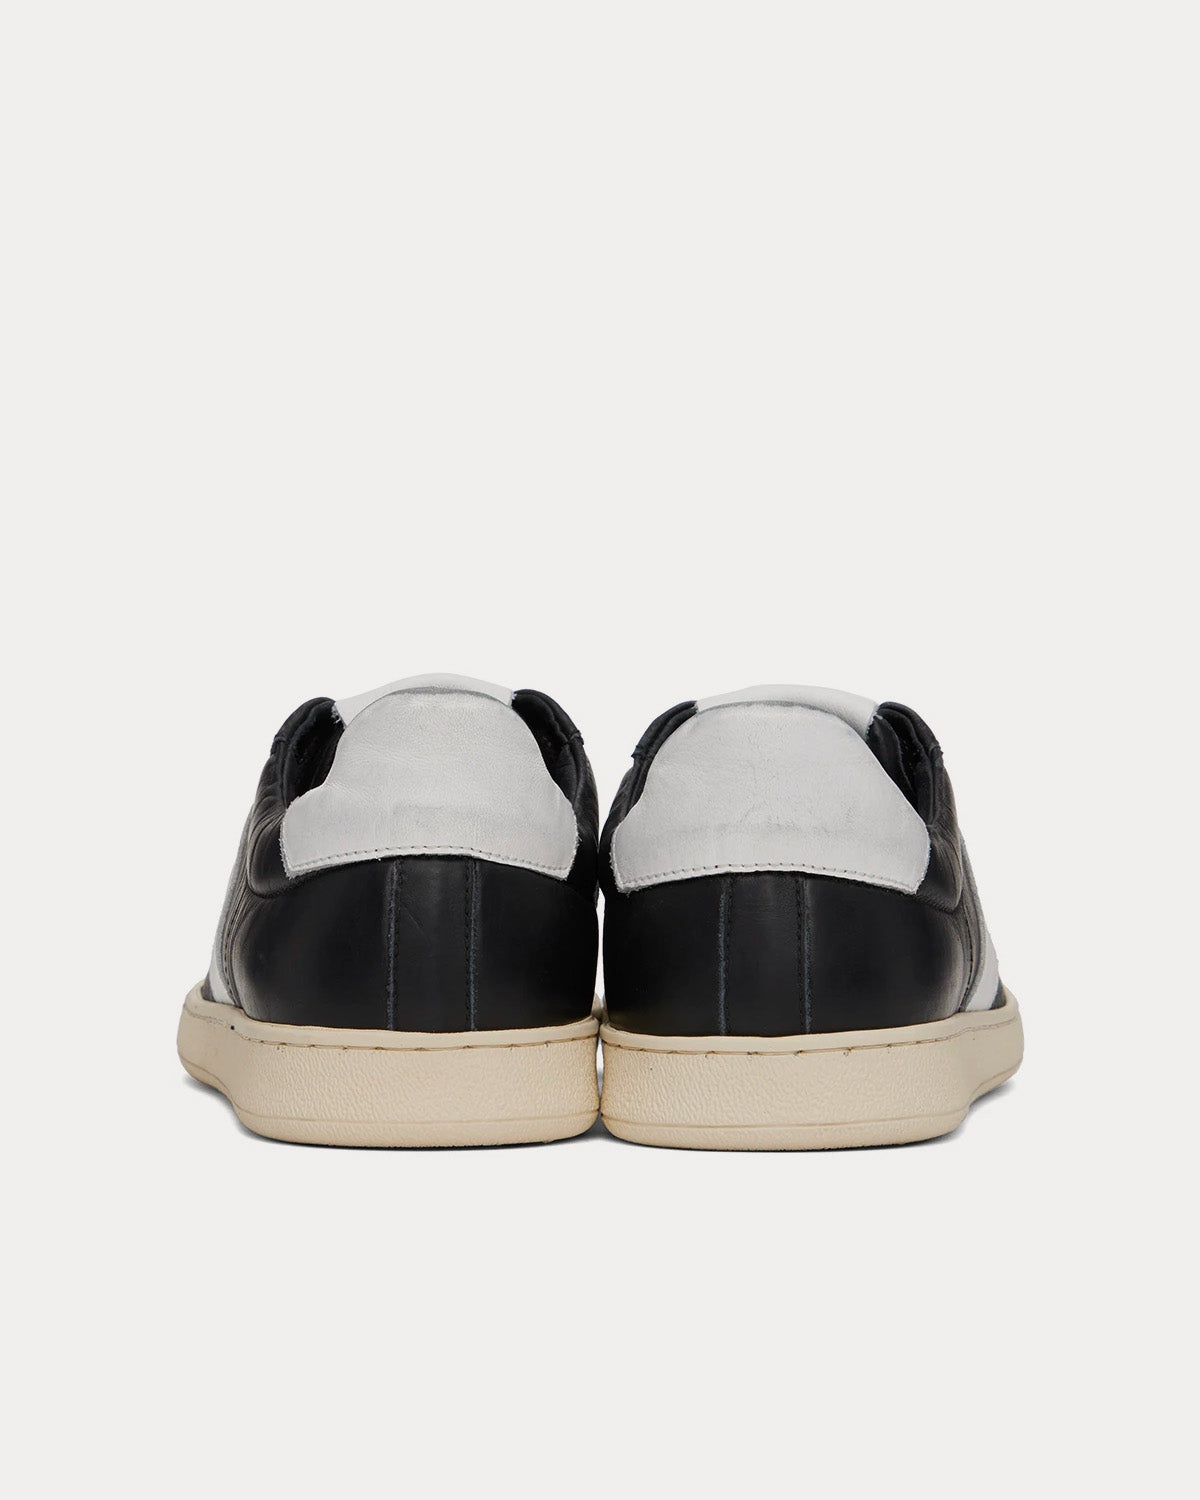 Rhude - Court Black / White Low Top Sneakers